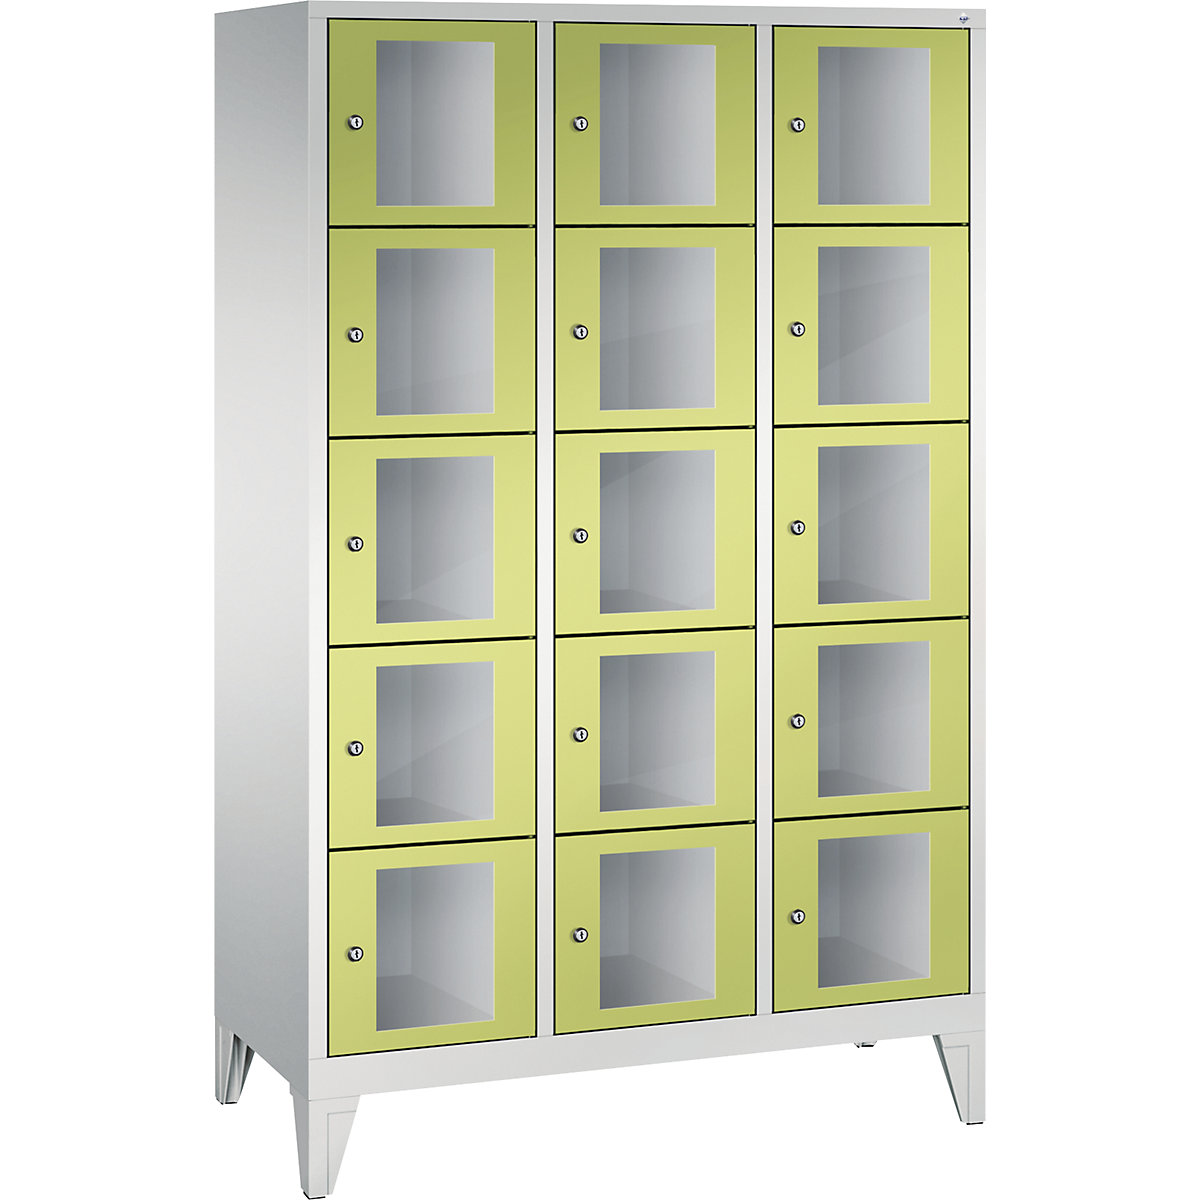 CLASSIC locker unit, compartment height 295 mm, with feet – C+P, 15 compartments, width 1200 mm, viridian green door